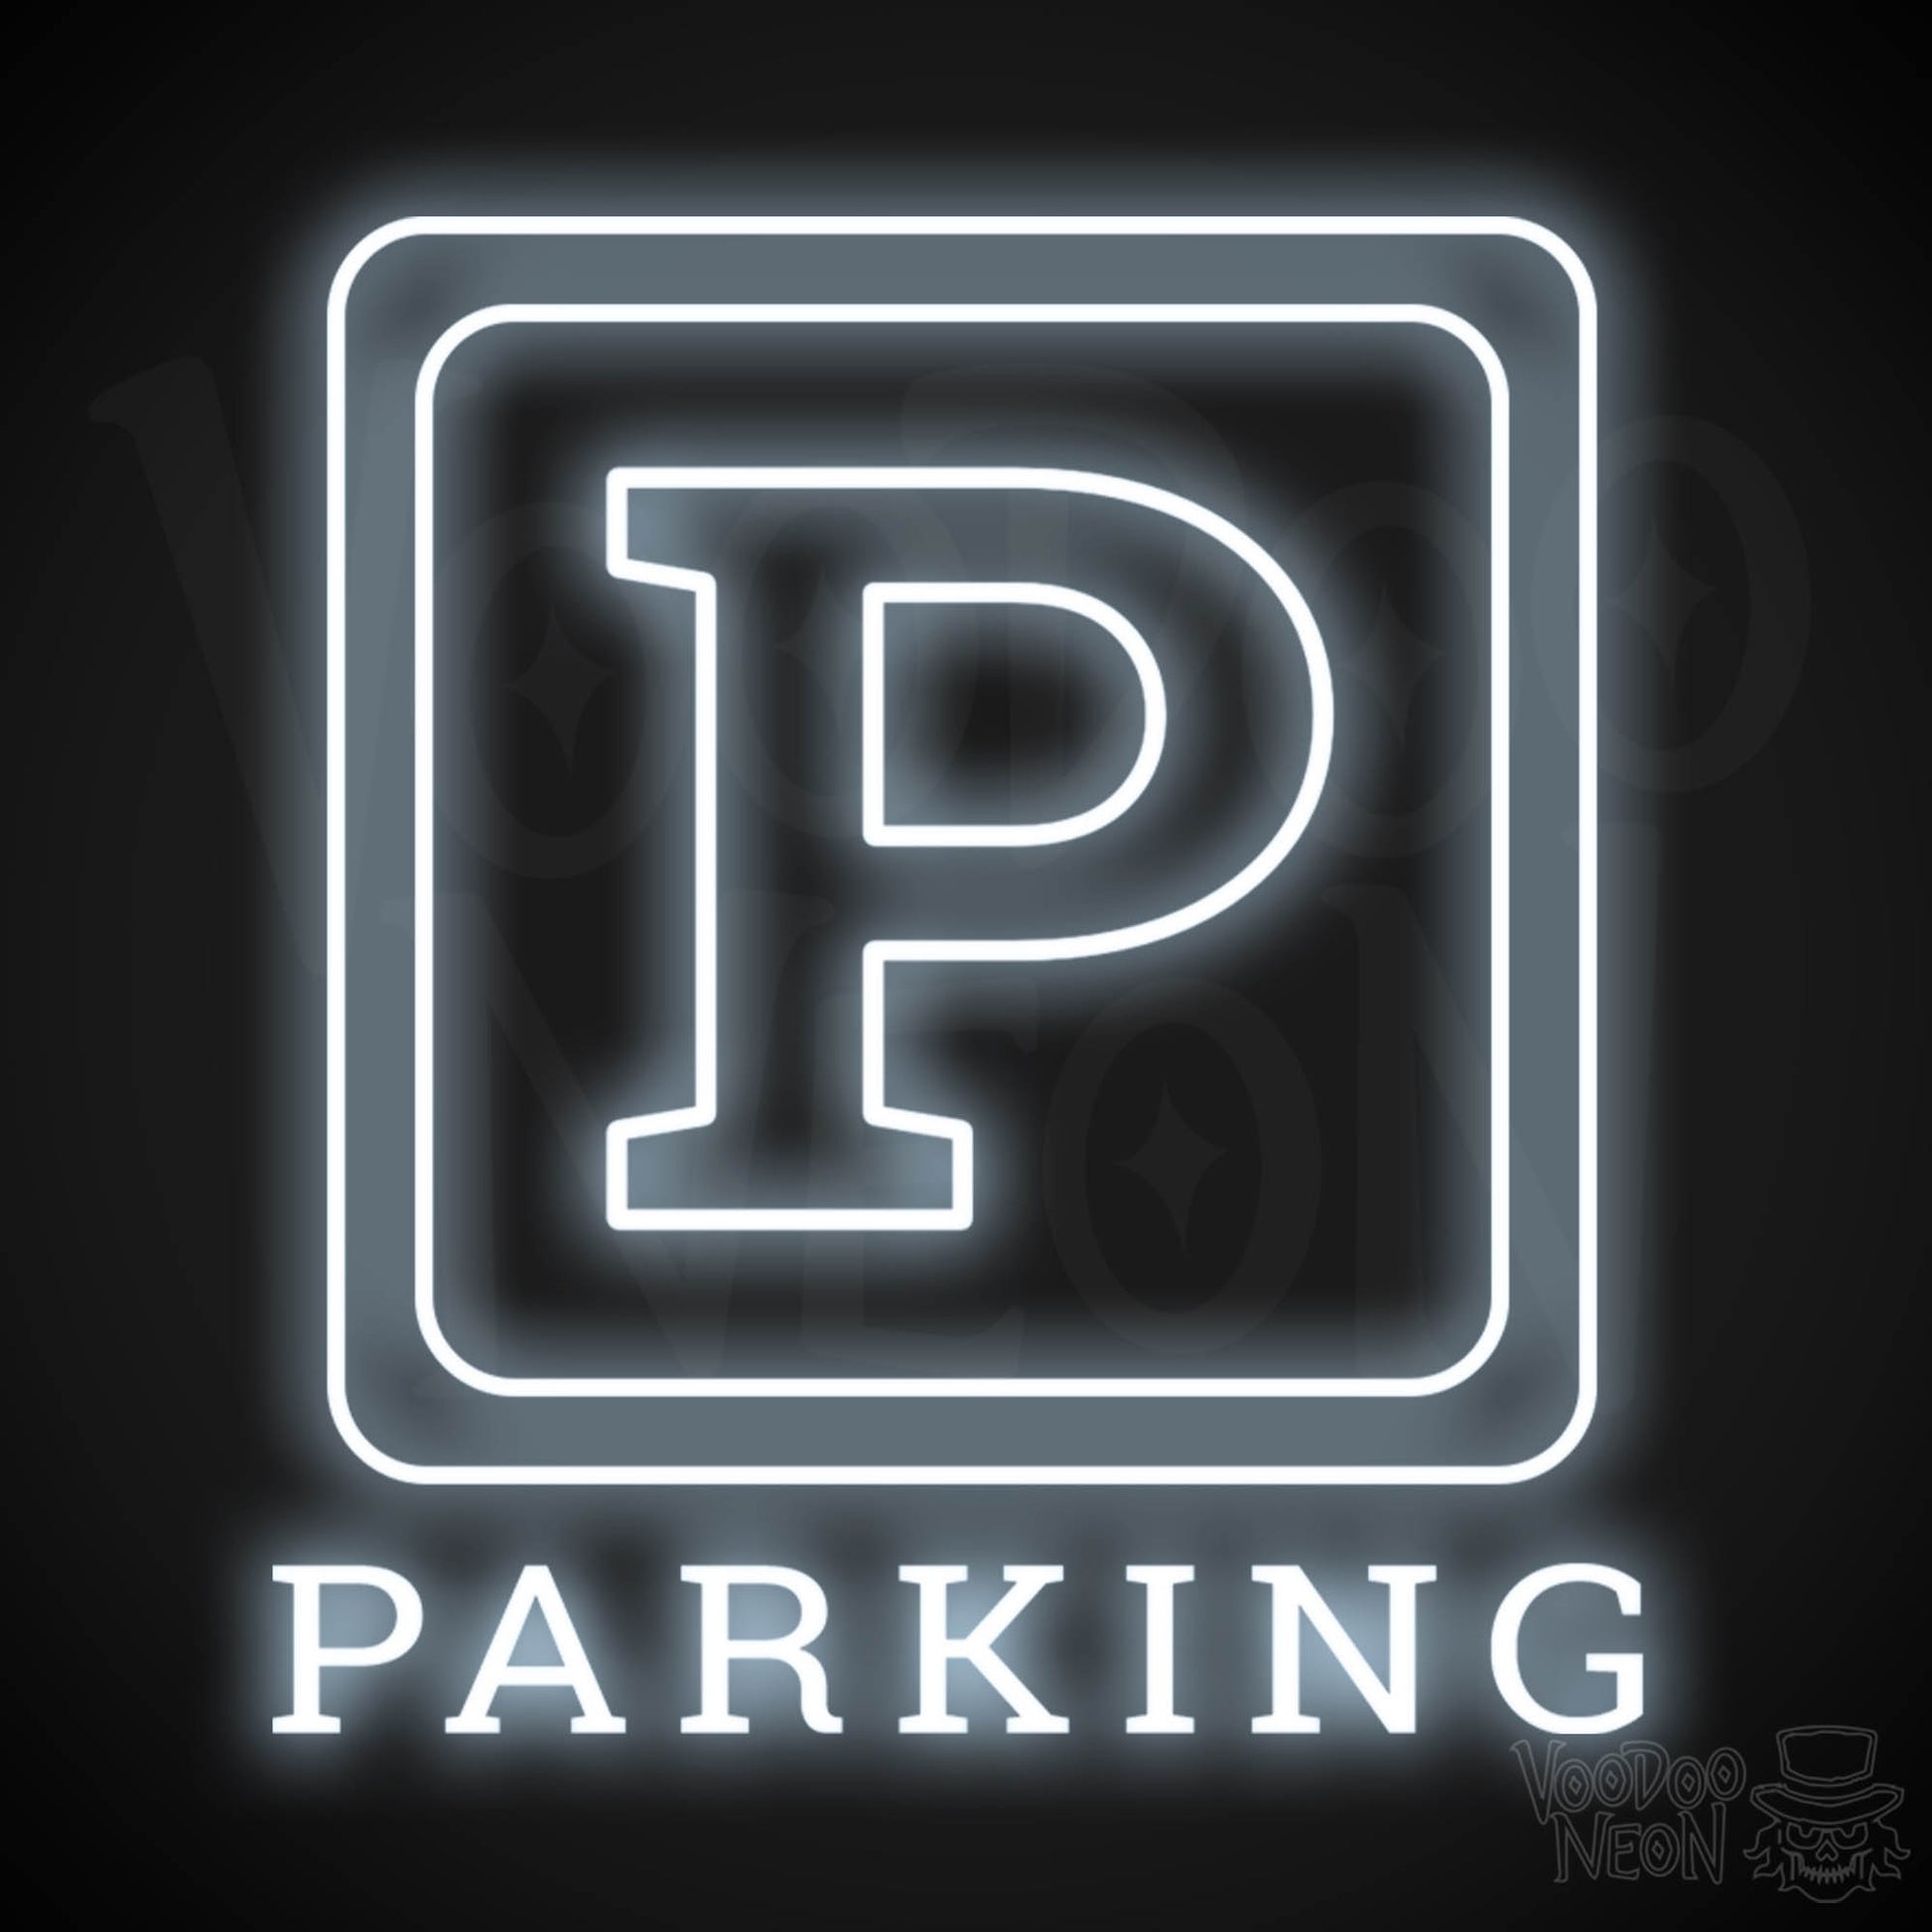 Parking LED Neon - Cool White